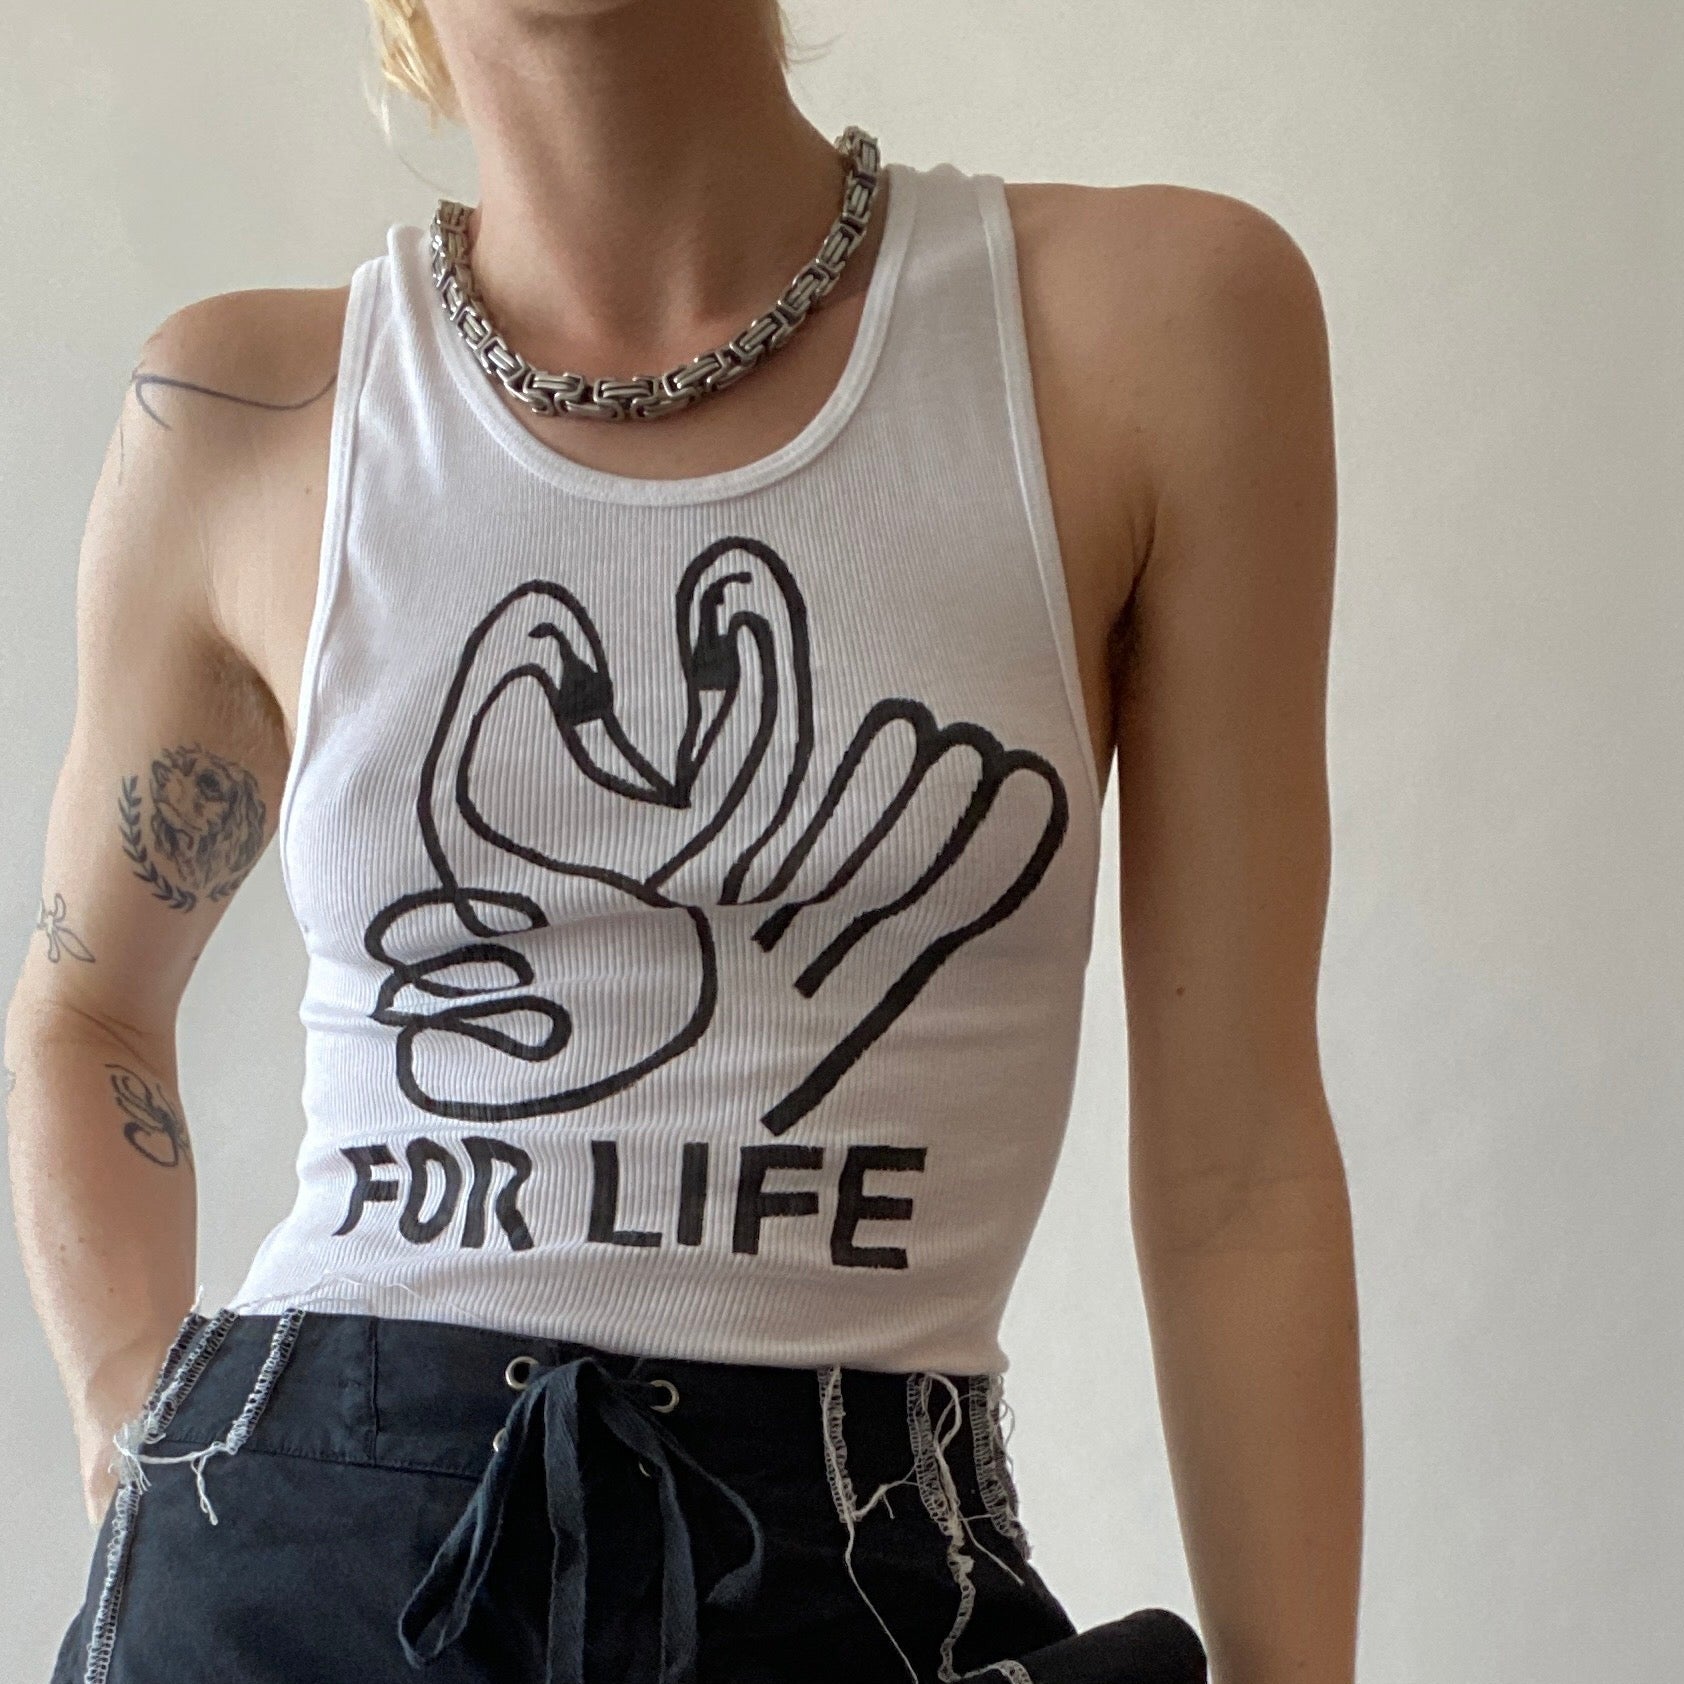 FOR LIFE swans tank top